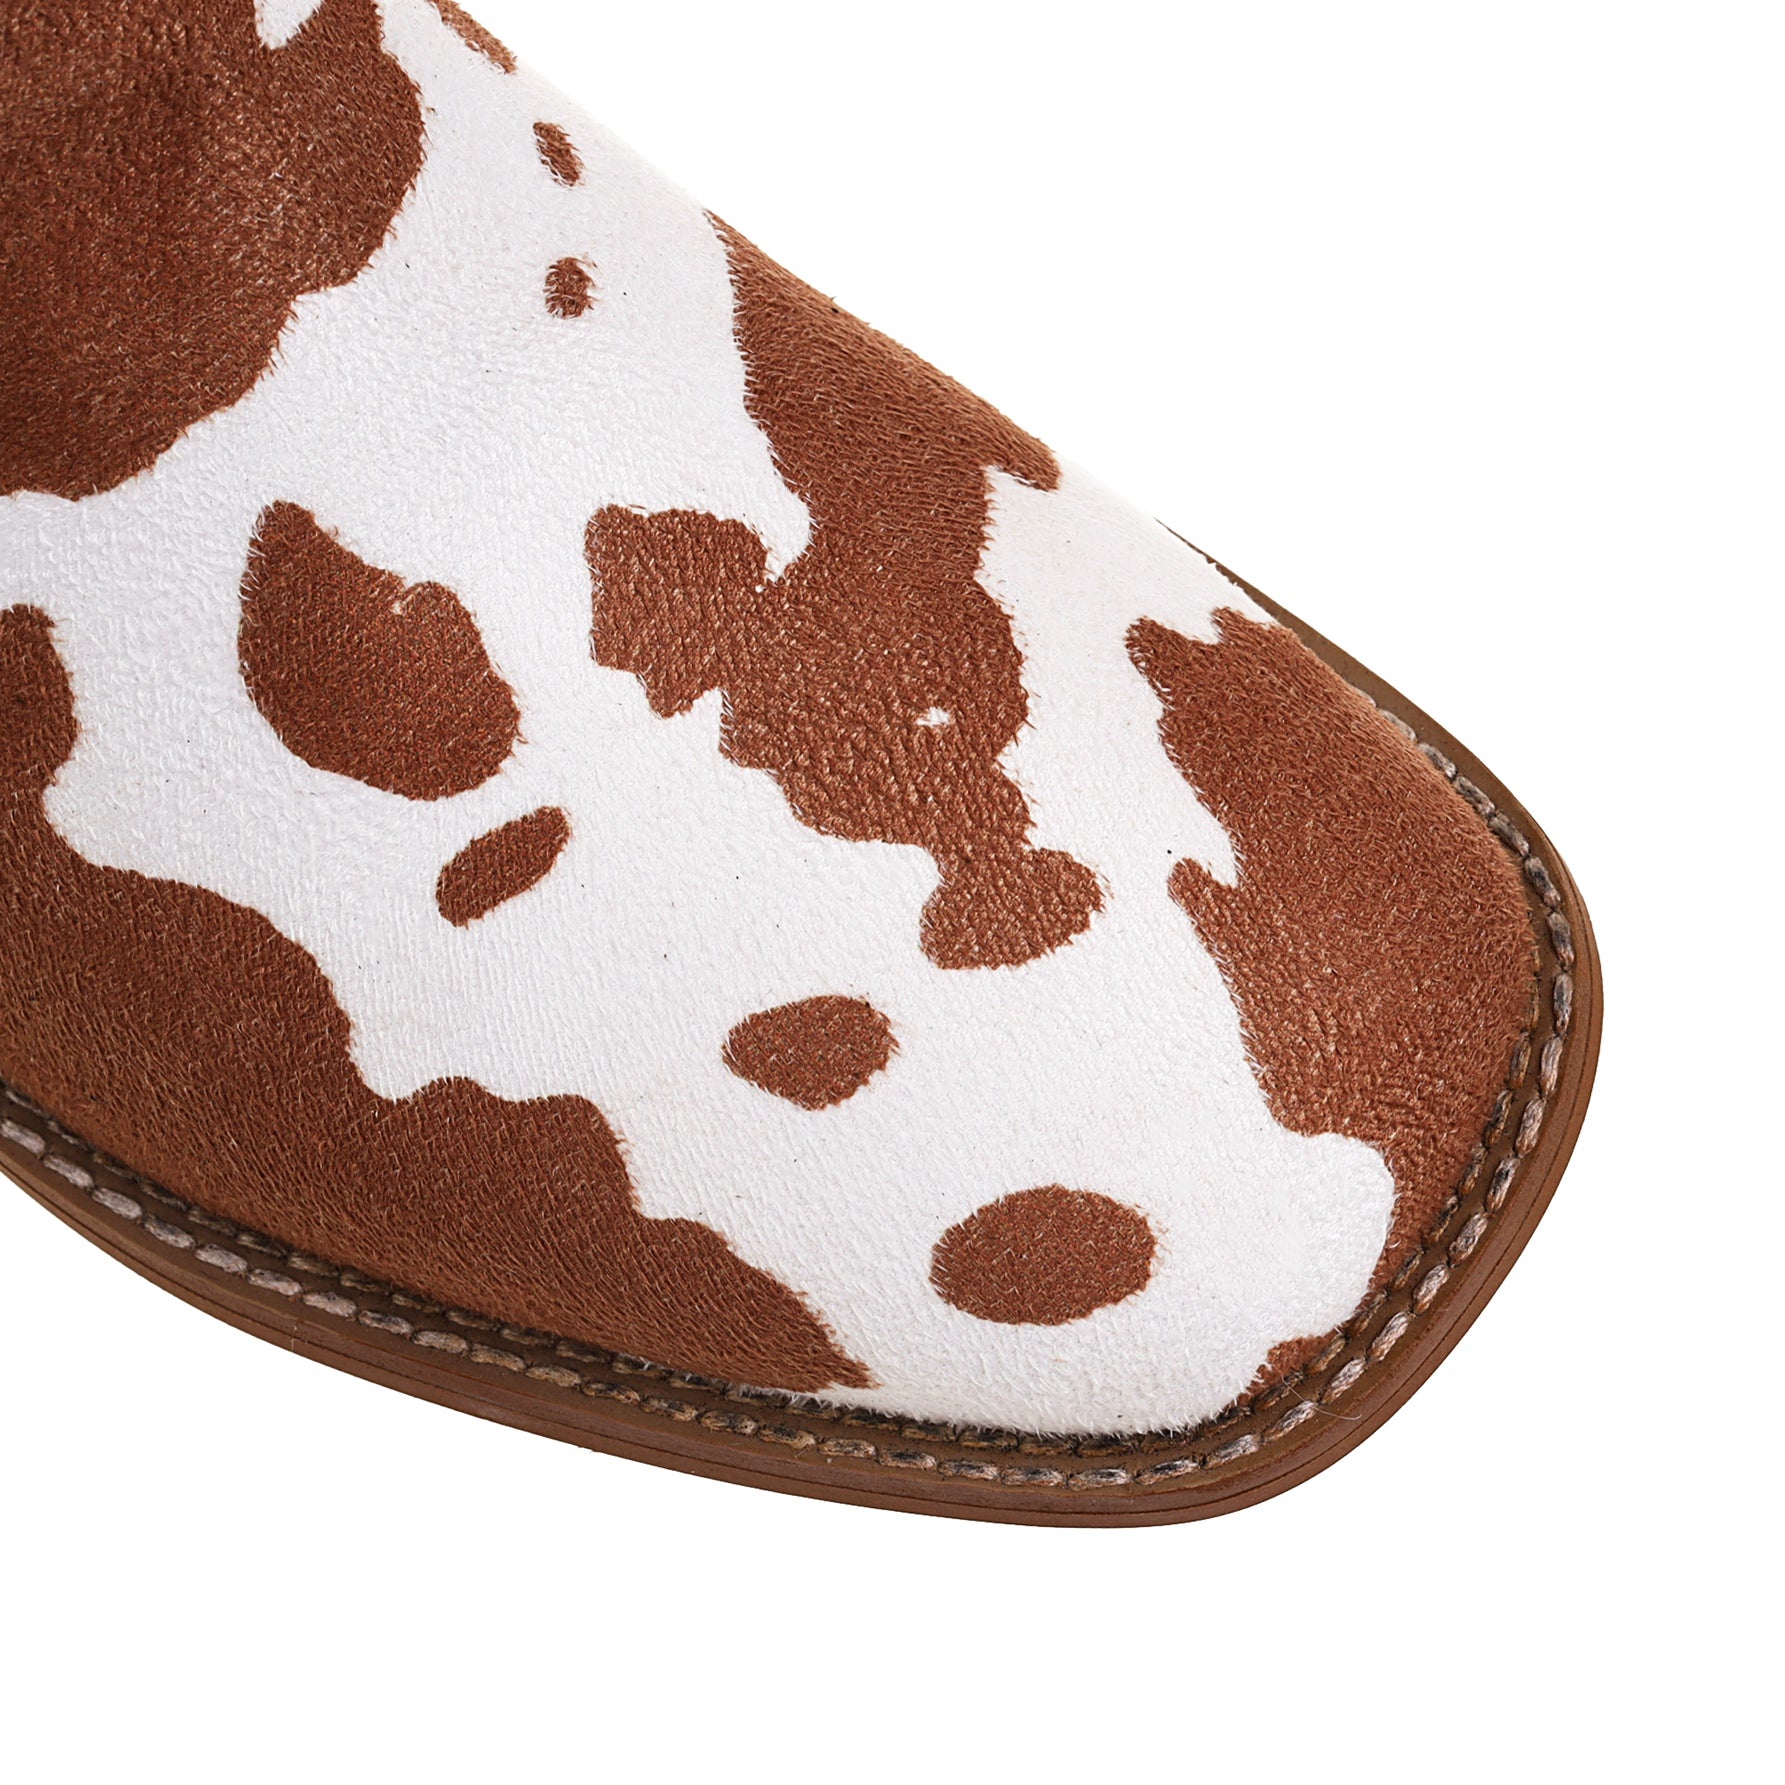 Bigsizeheels Western vintage Cow pattern boots - White/Brown freeshipping - bigsizeheel®-size5-size15 -All Plus Sizes Available!